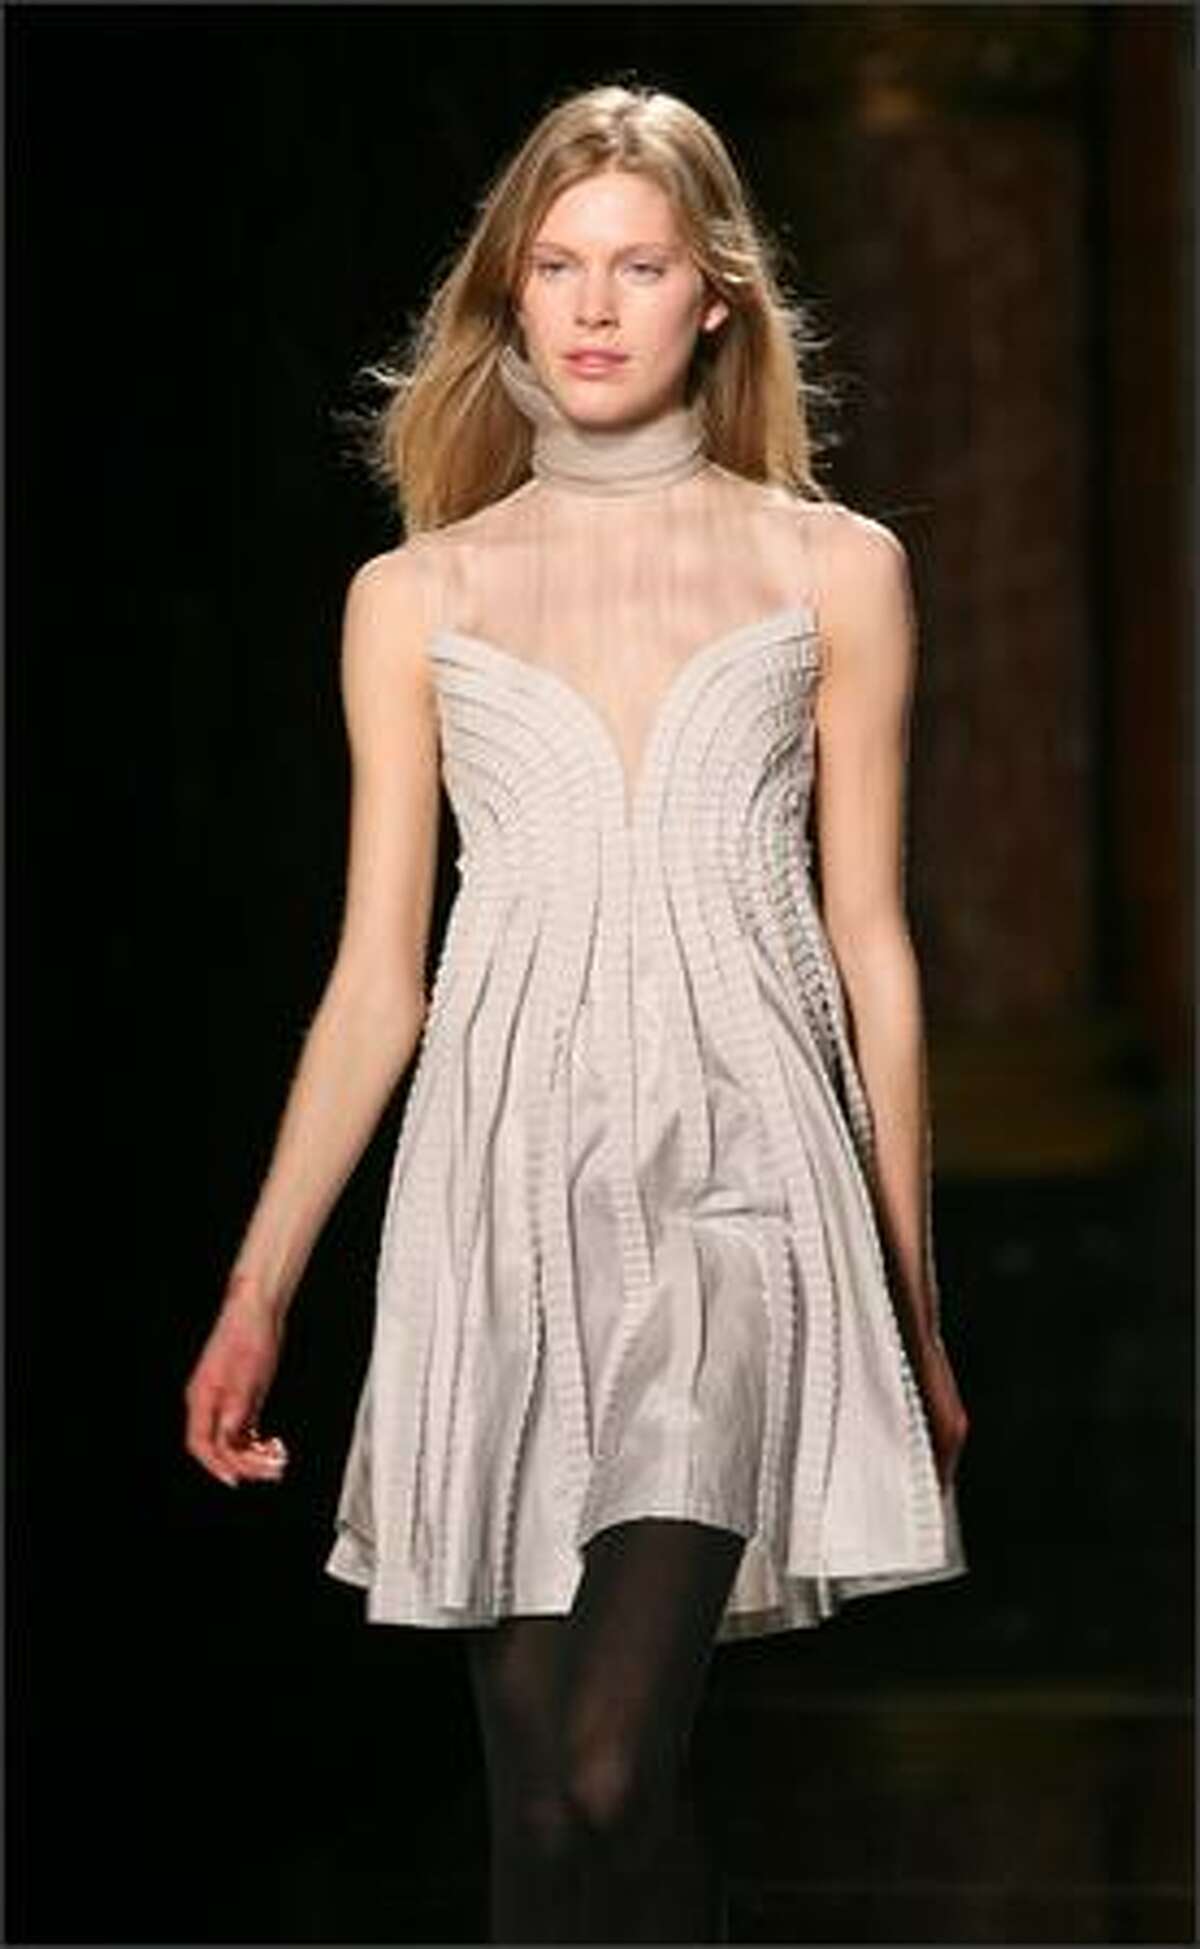 A model presents a creation from McCartney's fall/winter 2006-07 collection shown in Paris.